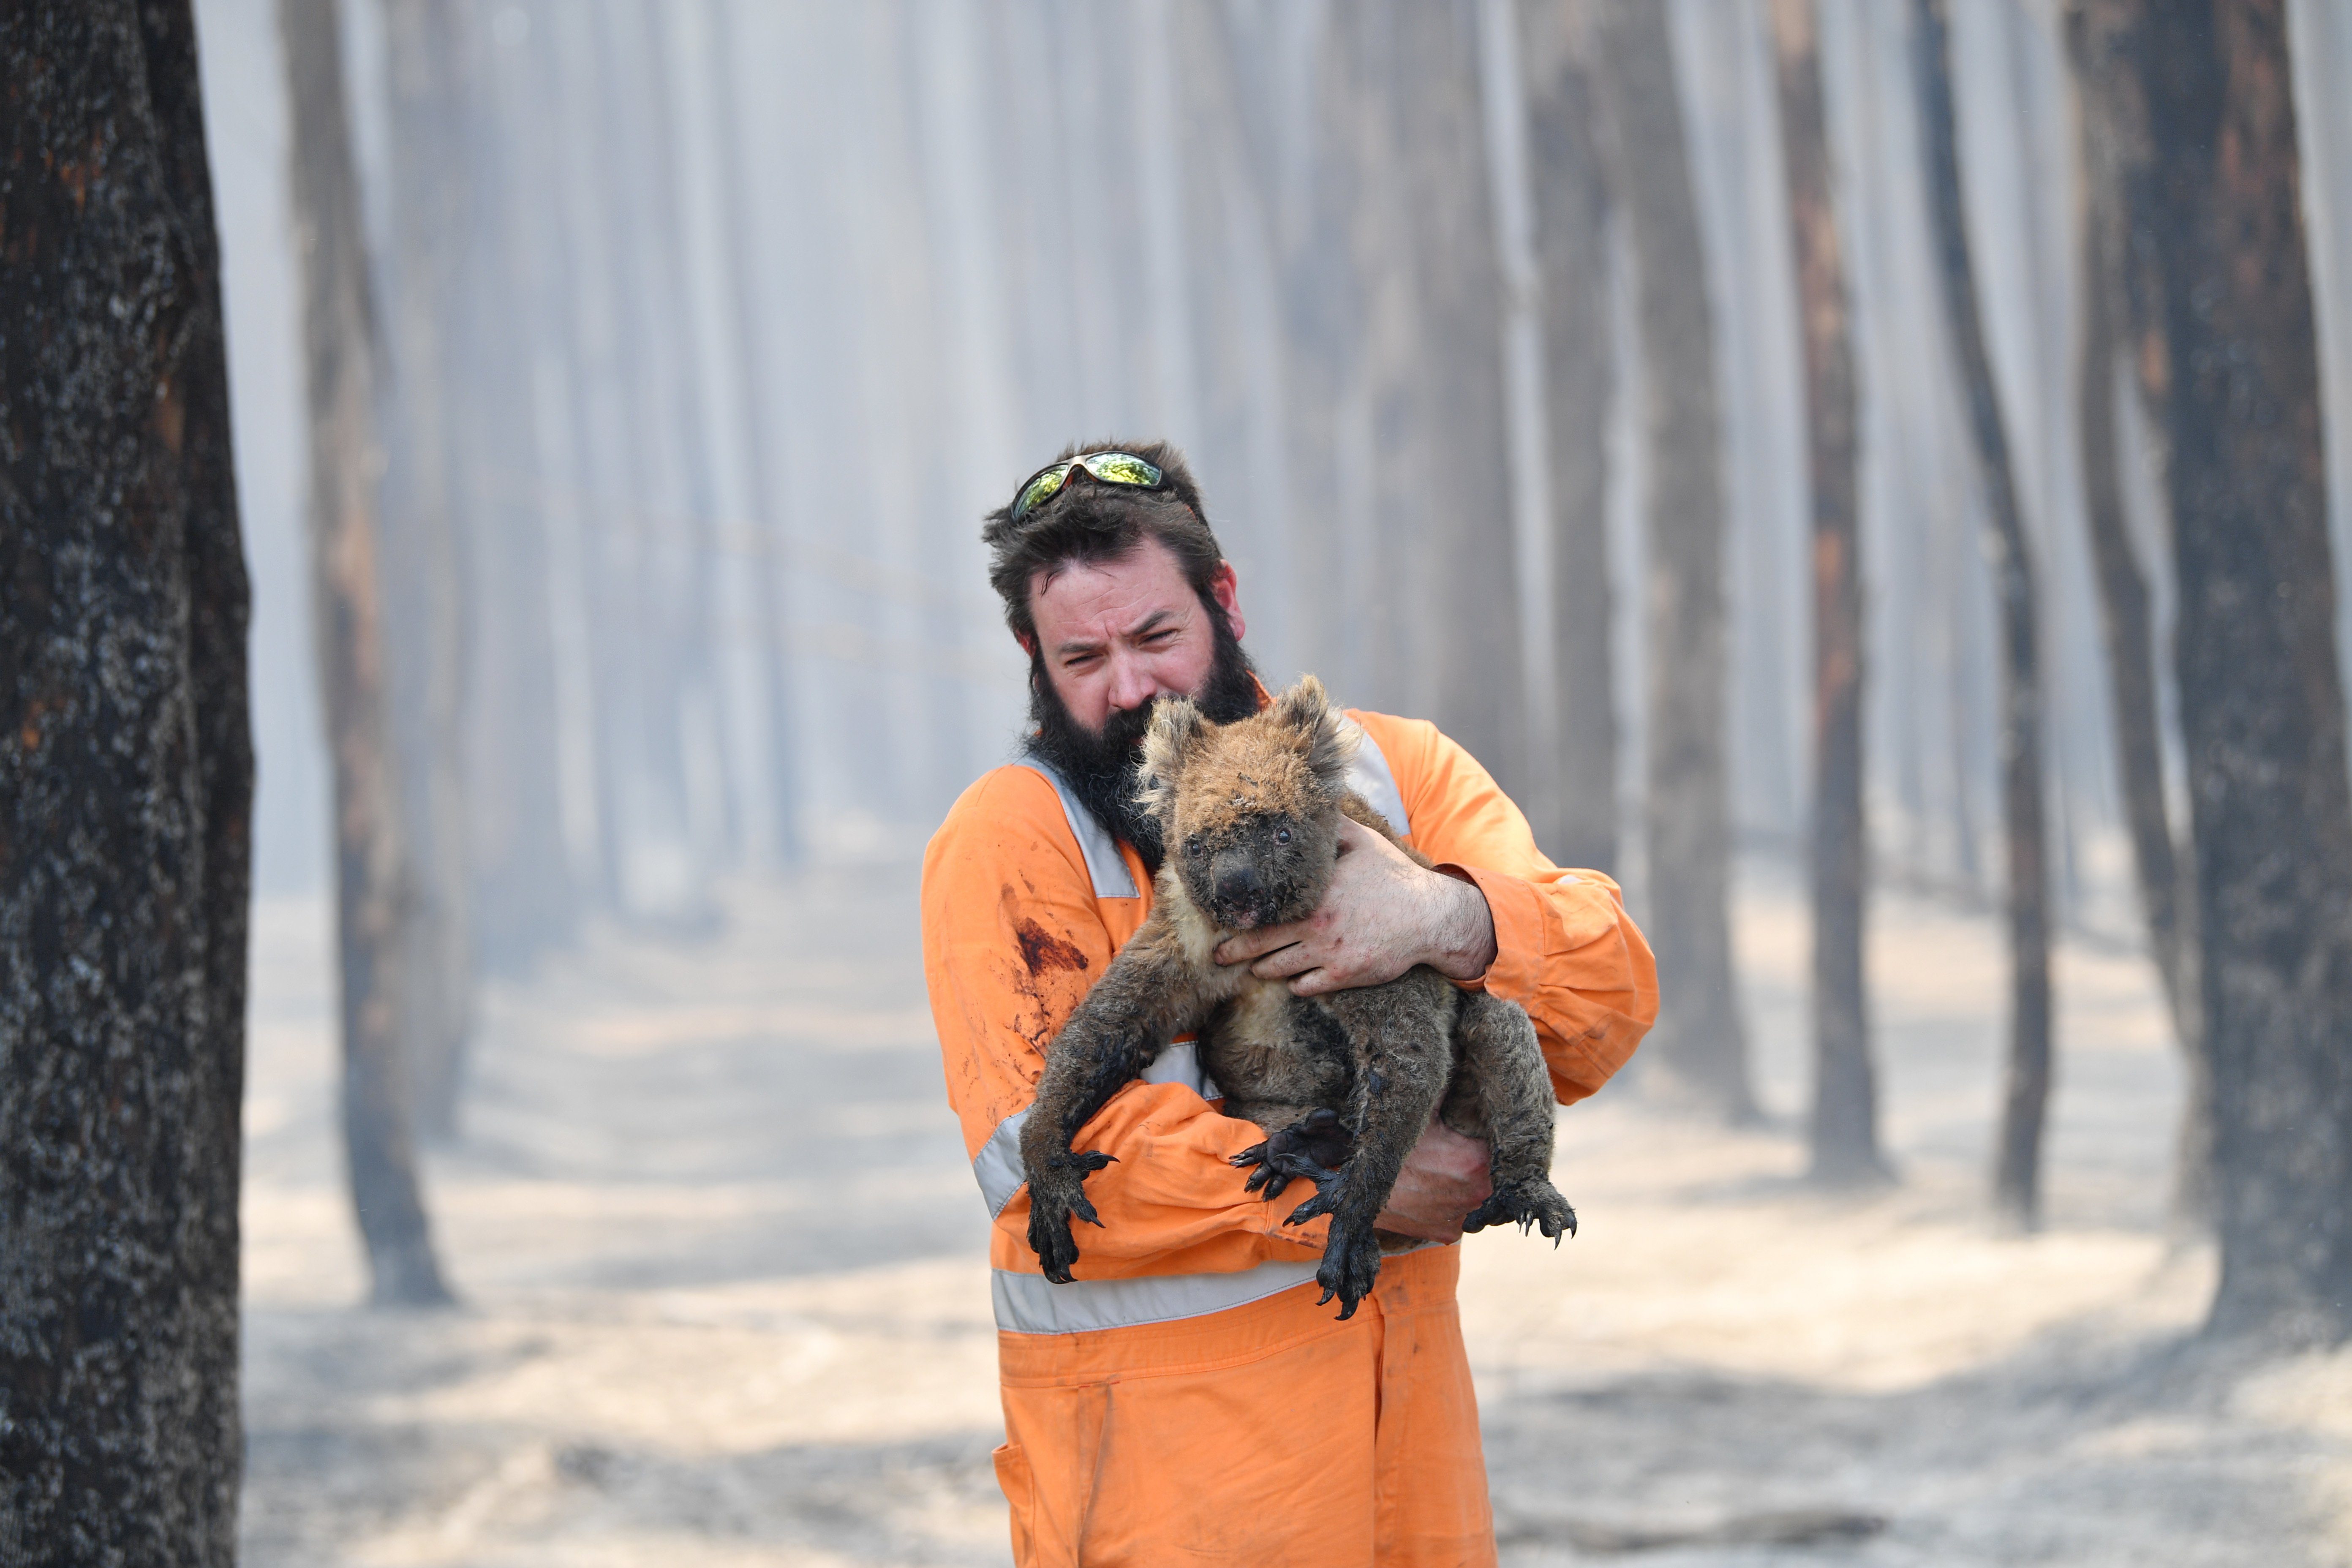 Mandatory Credit: Photo by DAVID MARIUZ/EPA-EFE/Shutterstock (10519515b) Adelaide wildlife rescuer Simon Adamczyk holds a koala he rescued at a burning forest near Cape Borda on Kangaroo Island, Australia, 07 January 2020. A convoy of Army vehicles, transporting up to 100 Army Reservists and self-sustainment supplies, is on Kangaroo Island as part of Operation Bushfire Assist at the request of the South Australian Government. Bushfires in Australia, Kangaroo Island - 07 Jan 2020